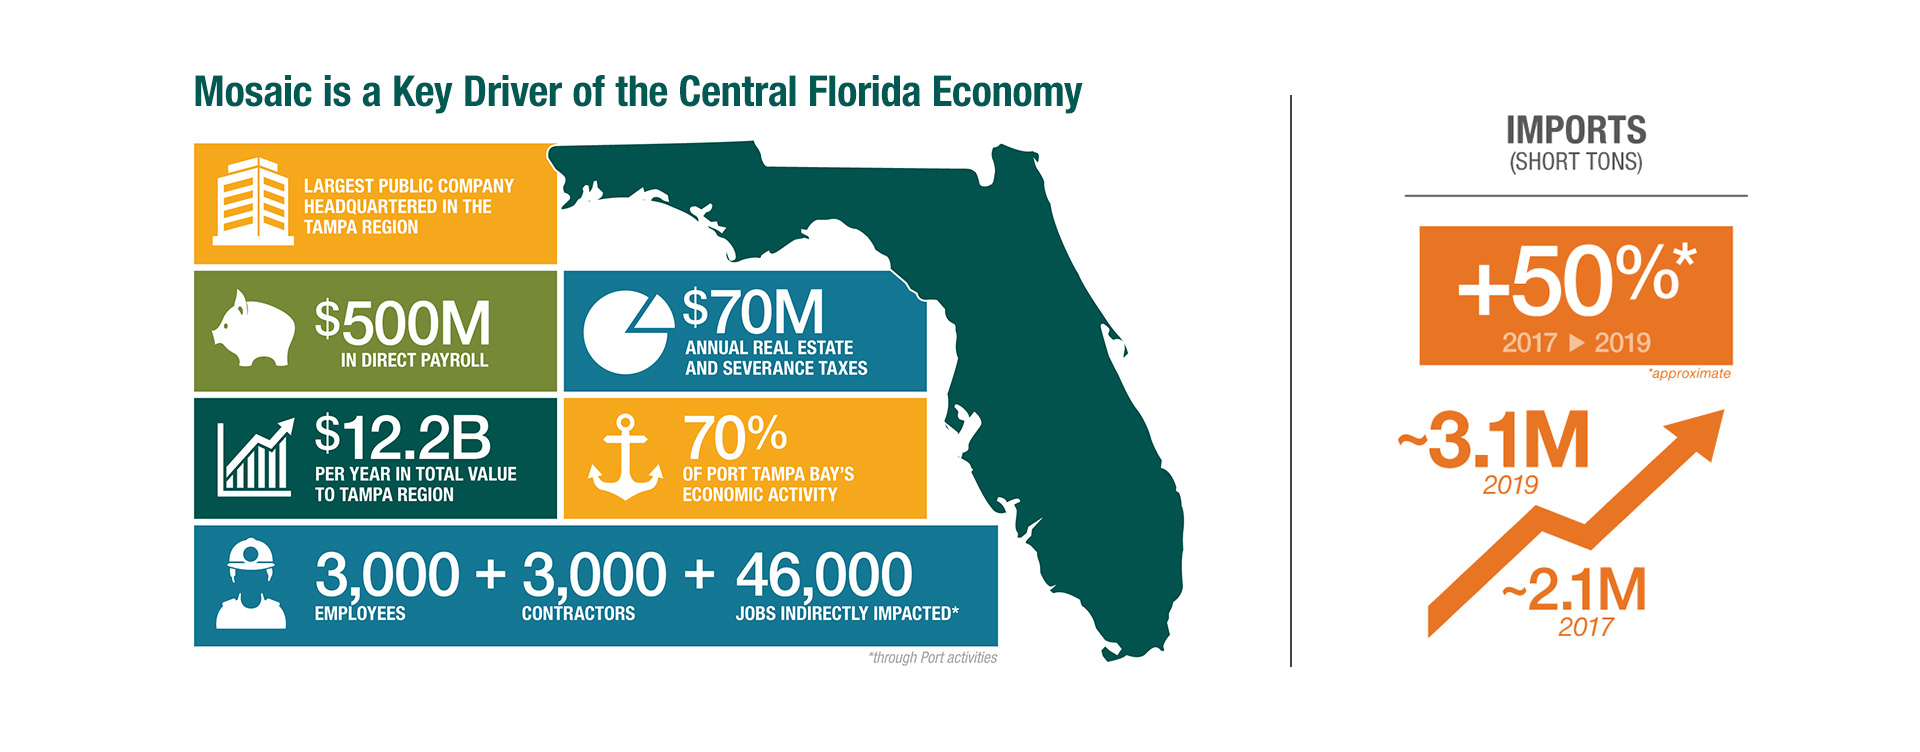 Florida facts and import stats